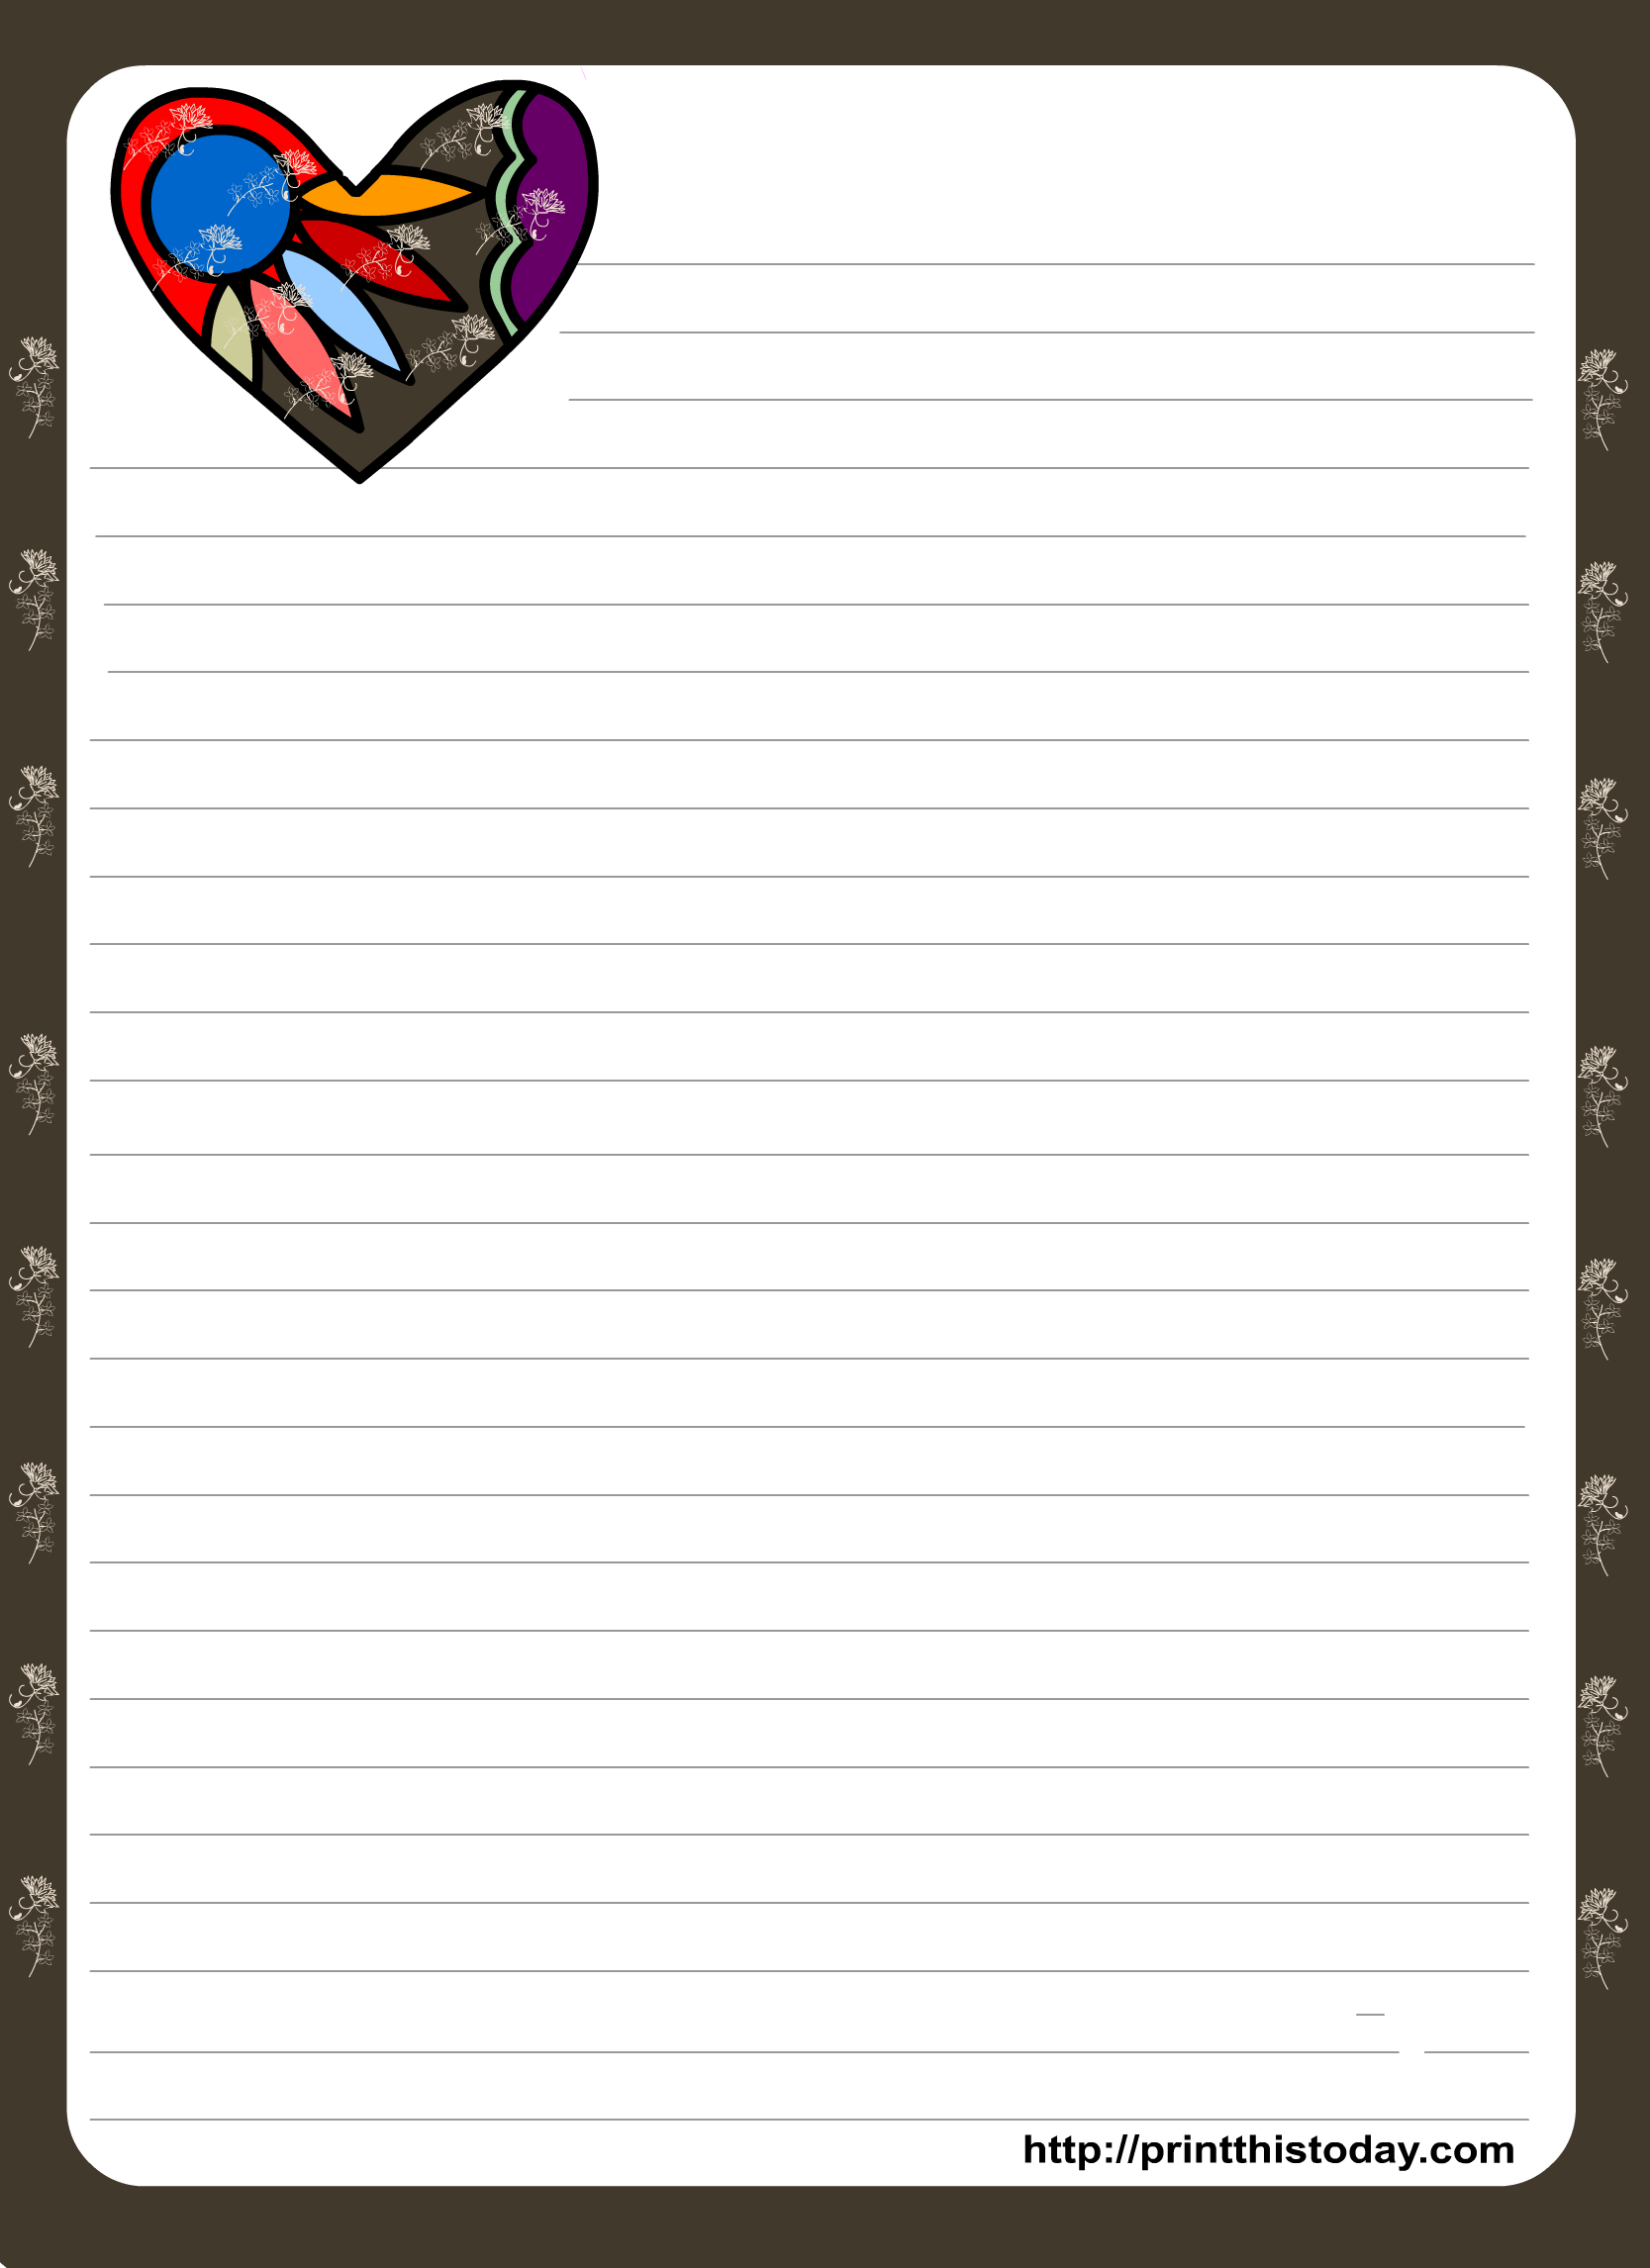 Love Letter Pad Stationery With Colorful Heart | Organization - Free Printable Stationary Pdf